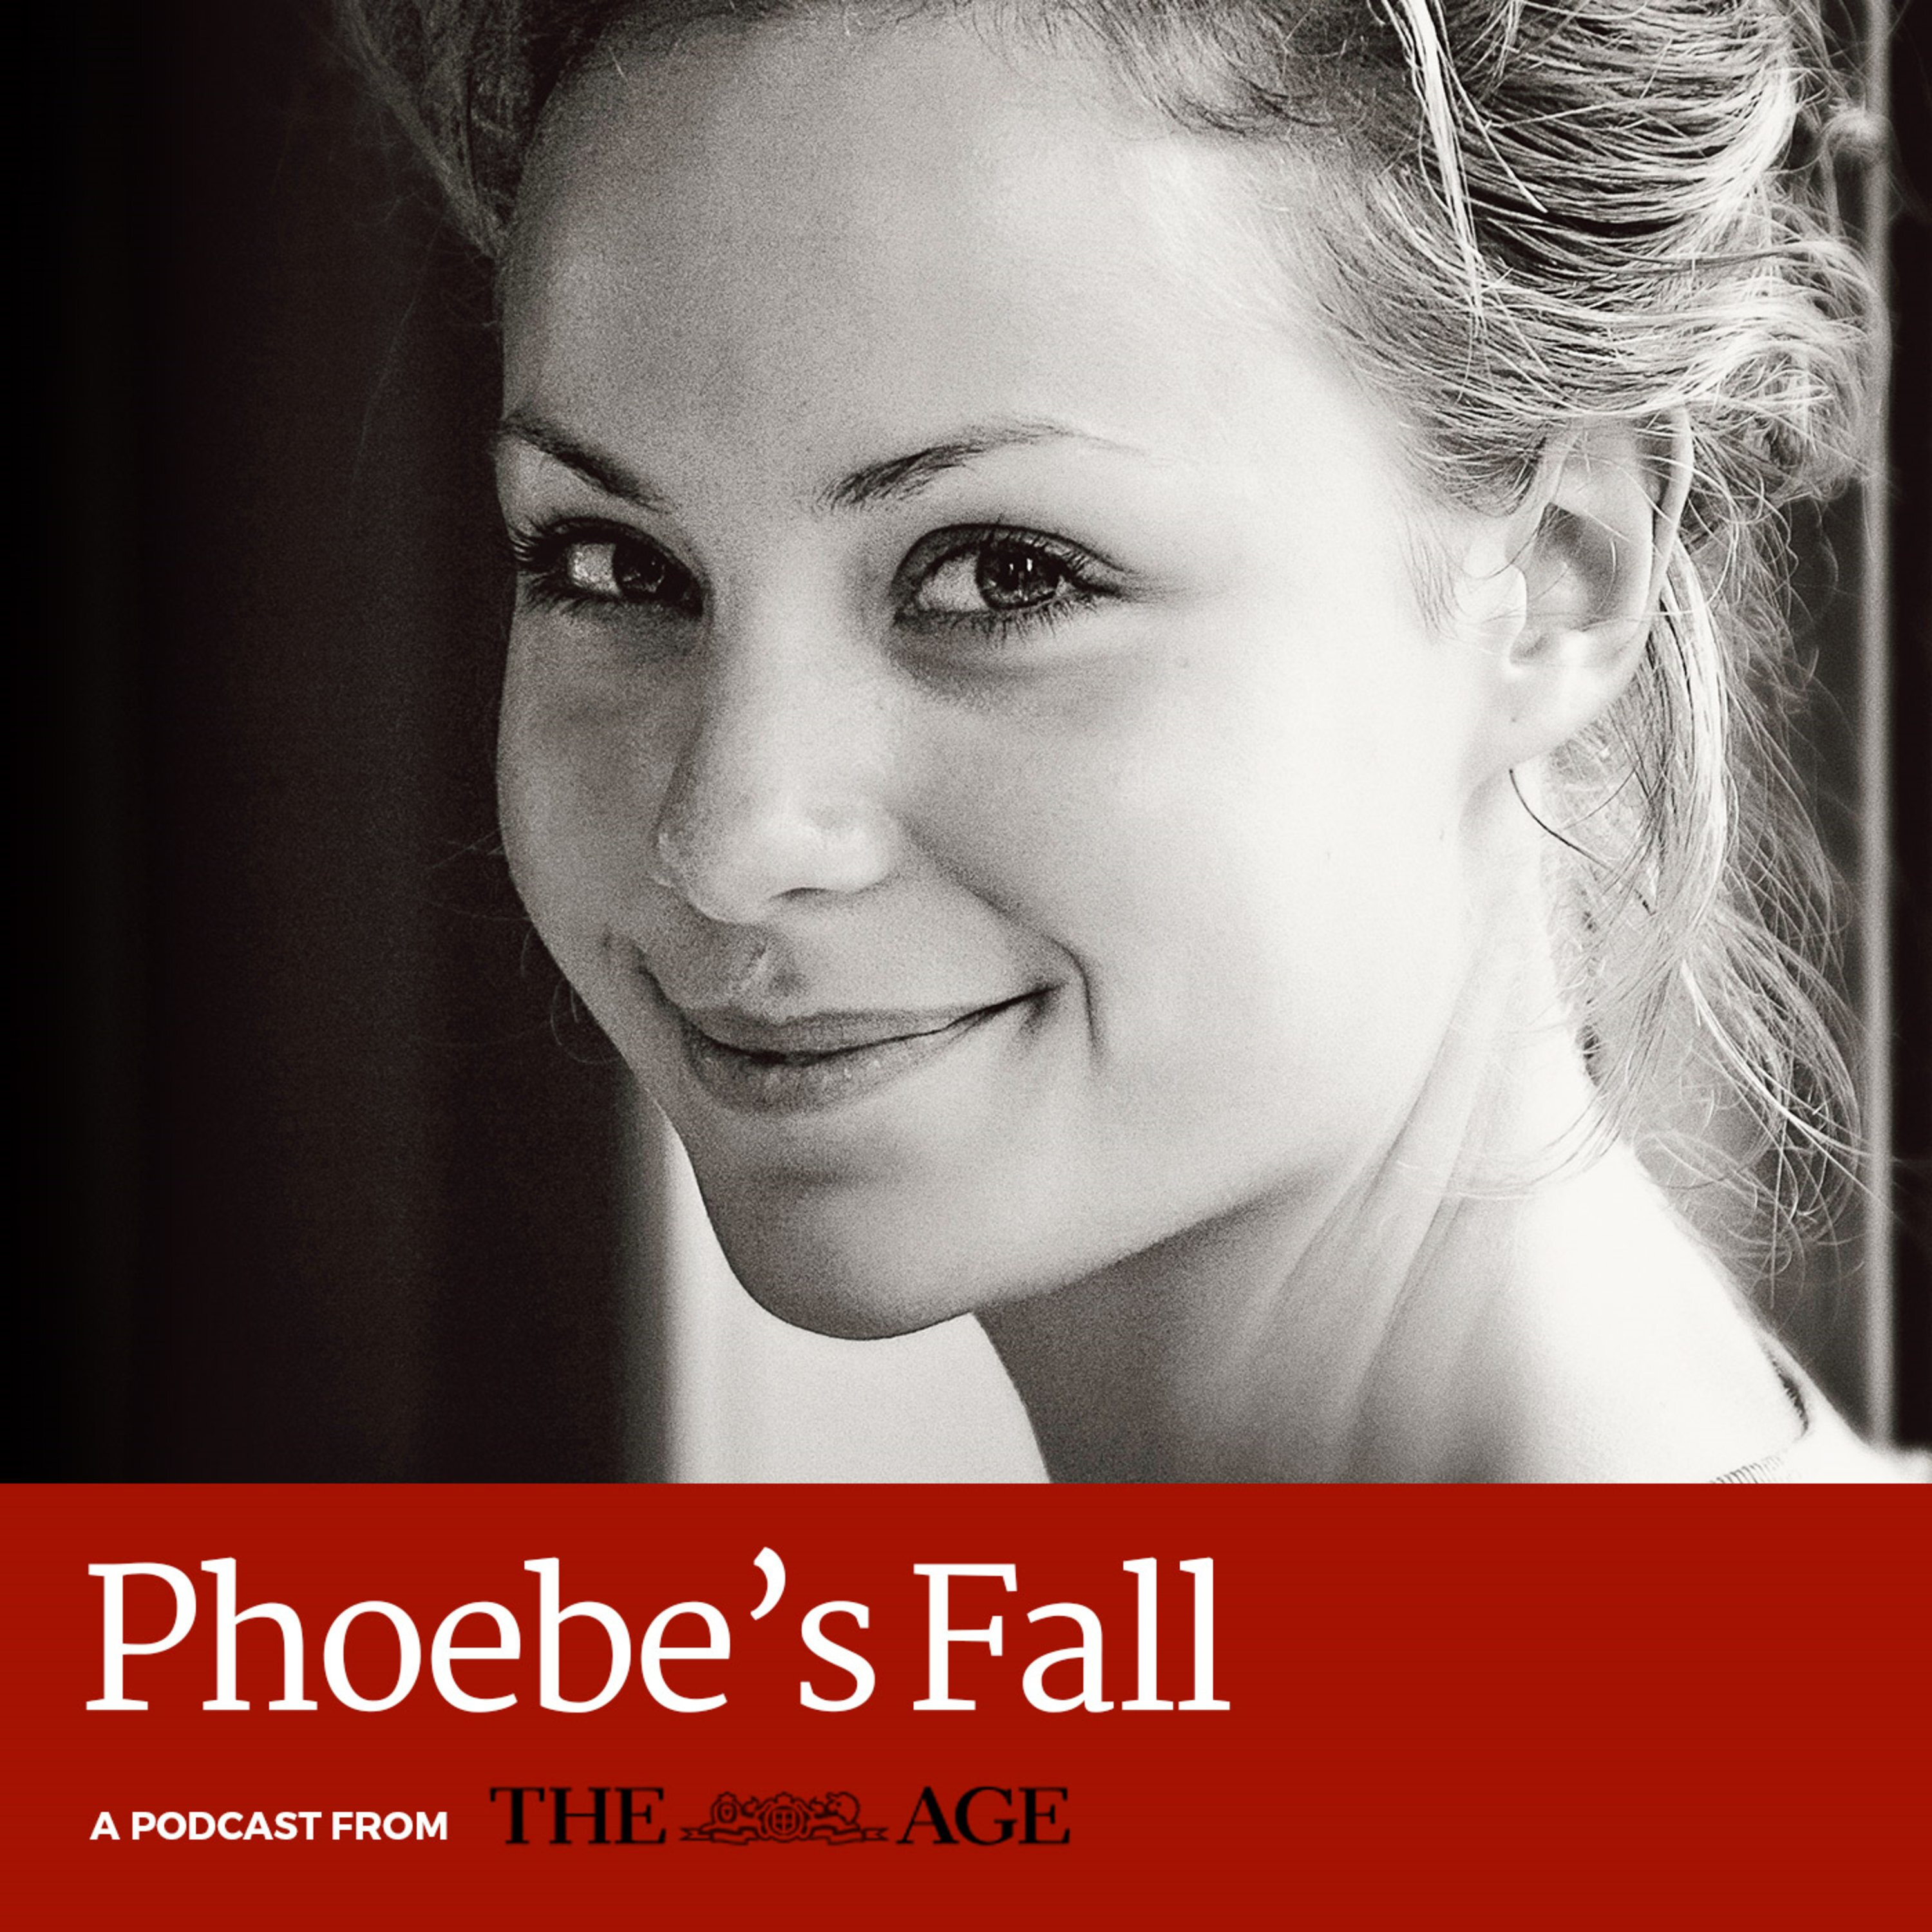 Coming soon - Phoebe’s Fall - a podcast from The Age